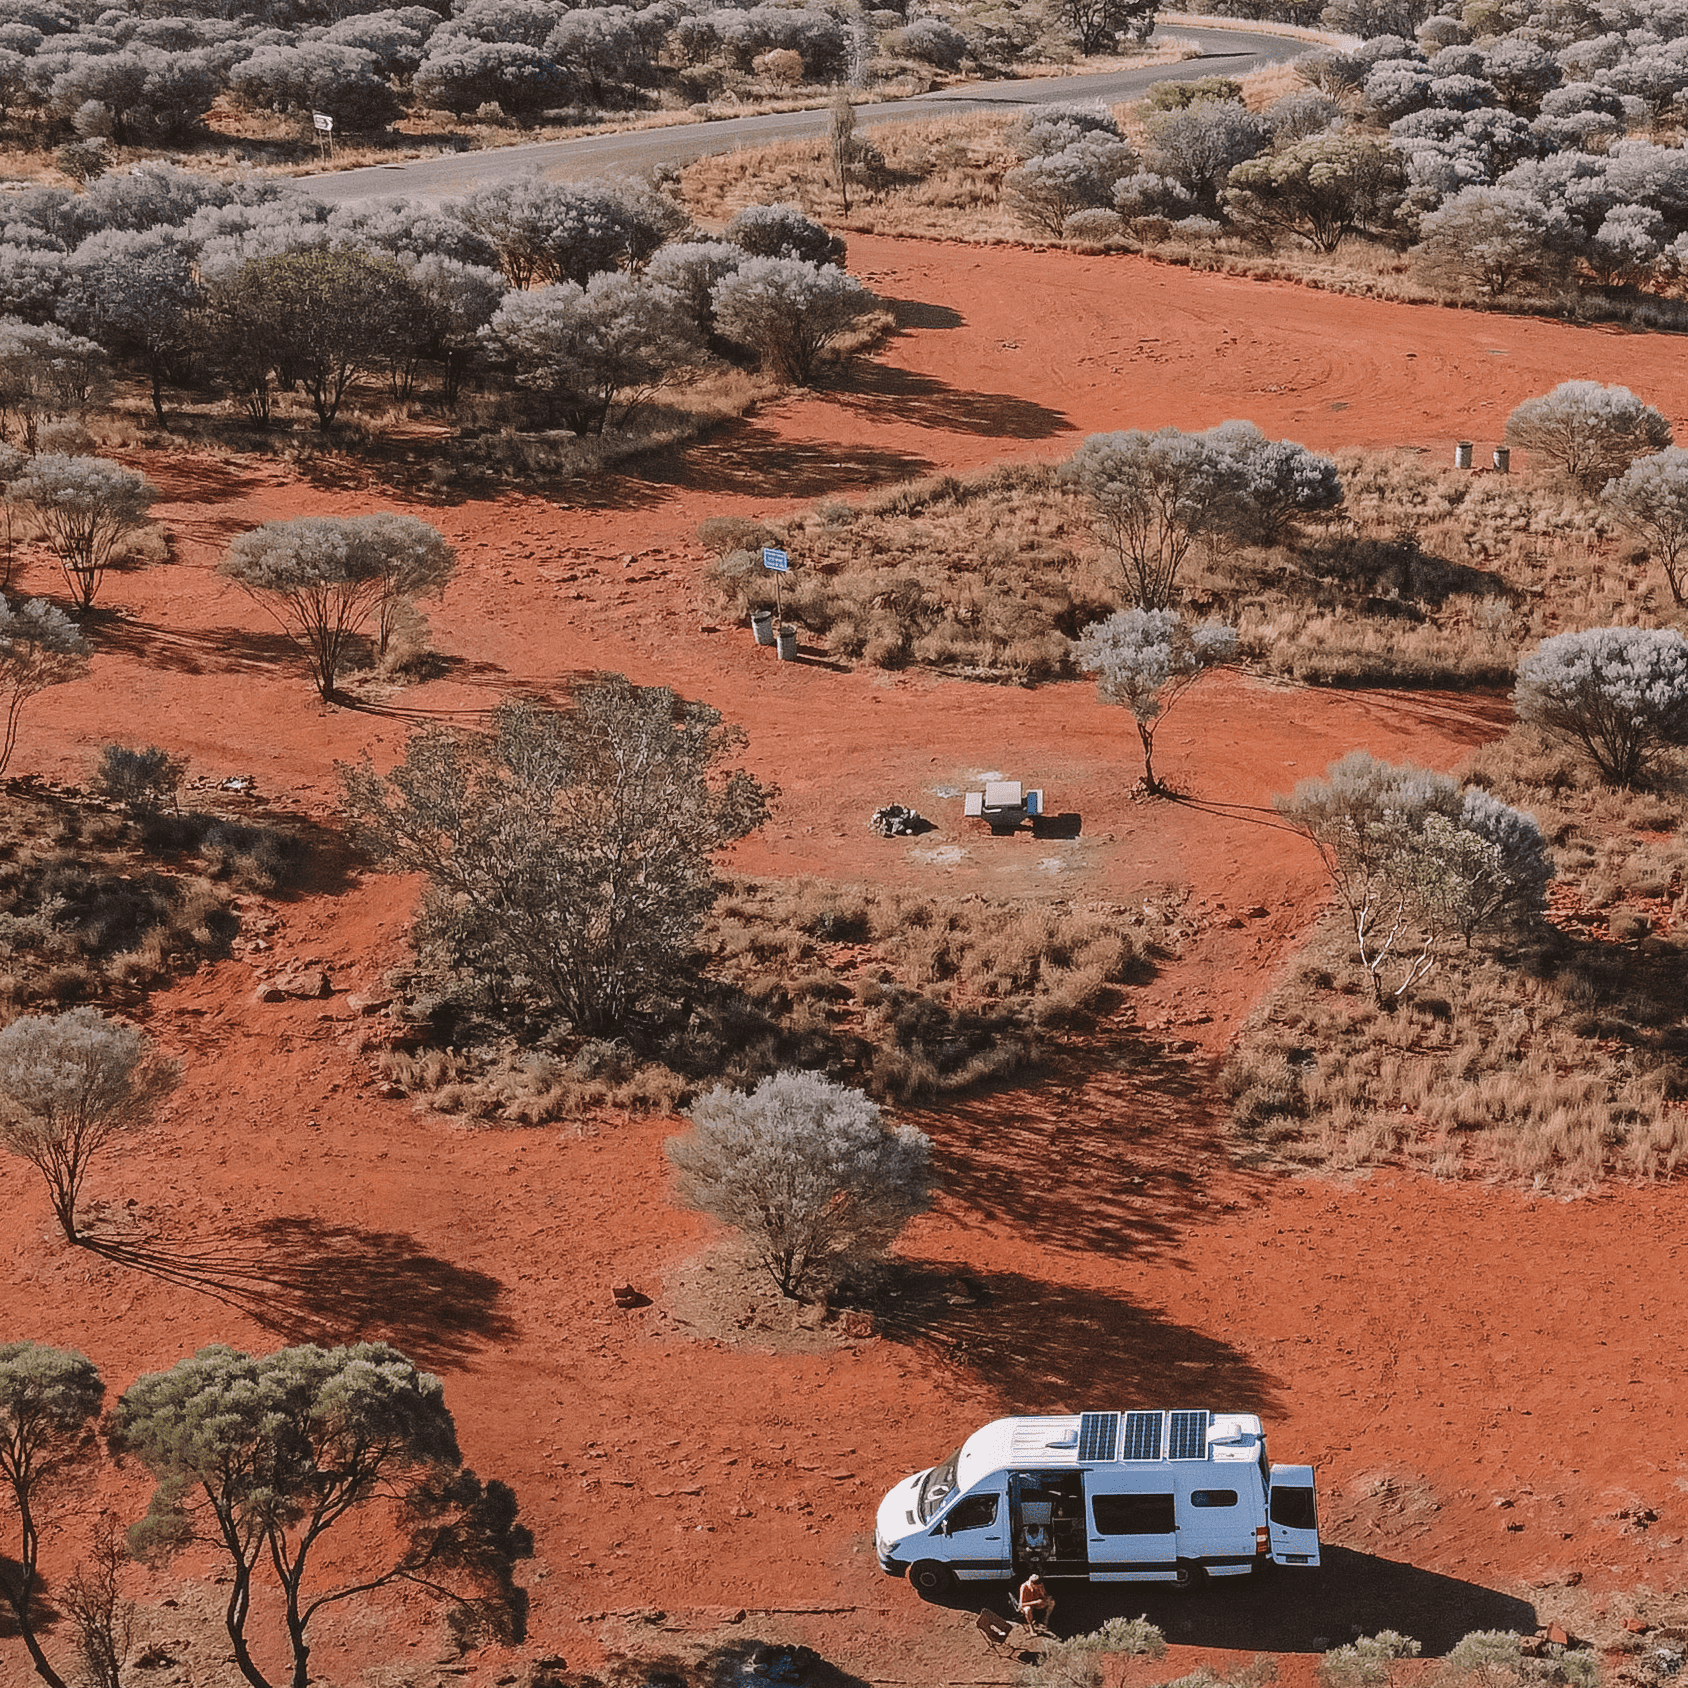 Our campervan parked at a campground that is made of red dirt and looks like the desert. 